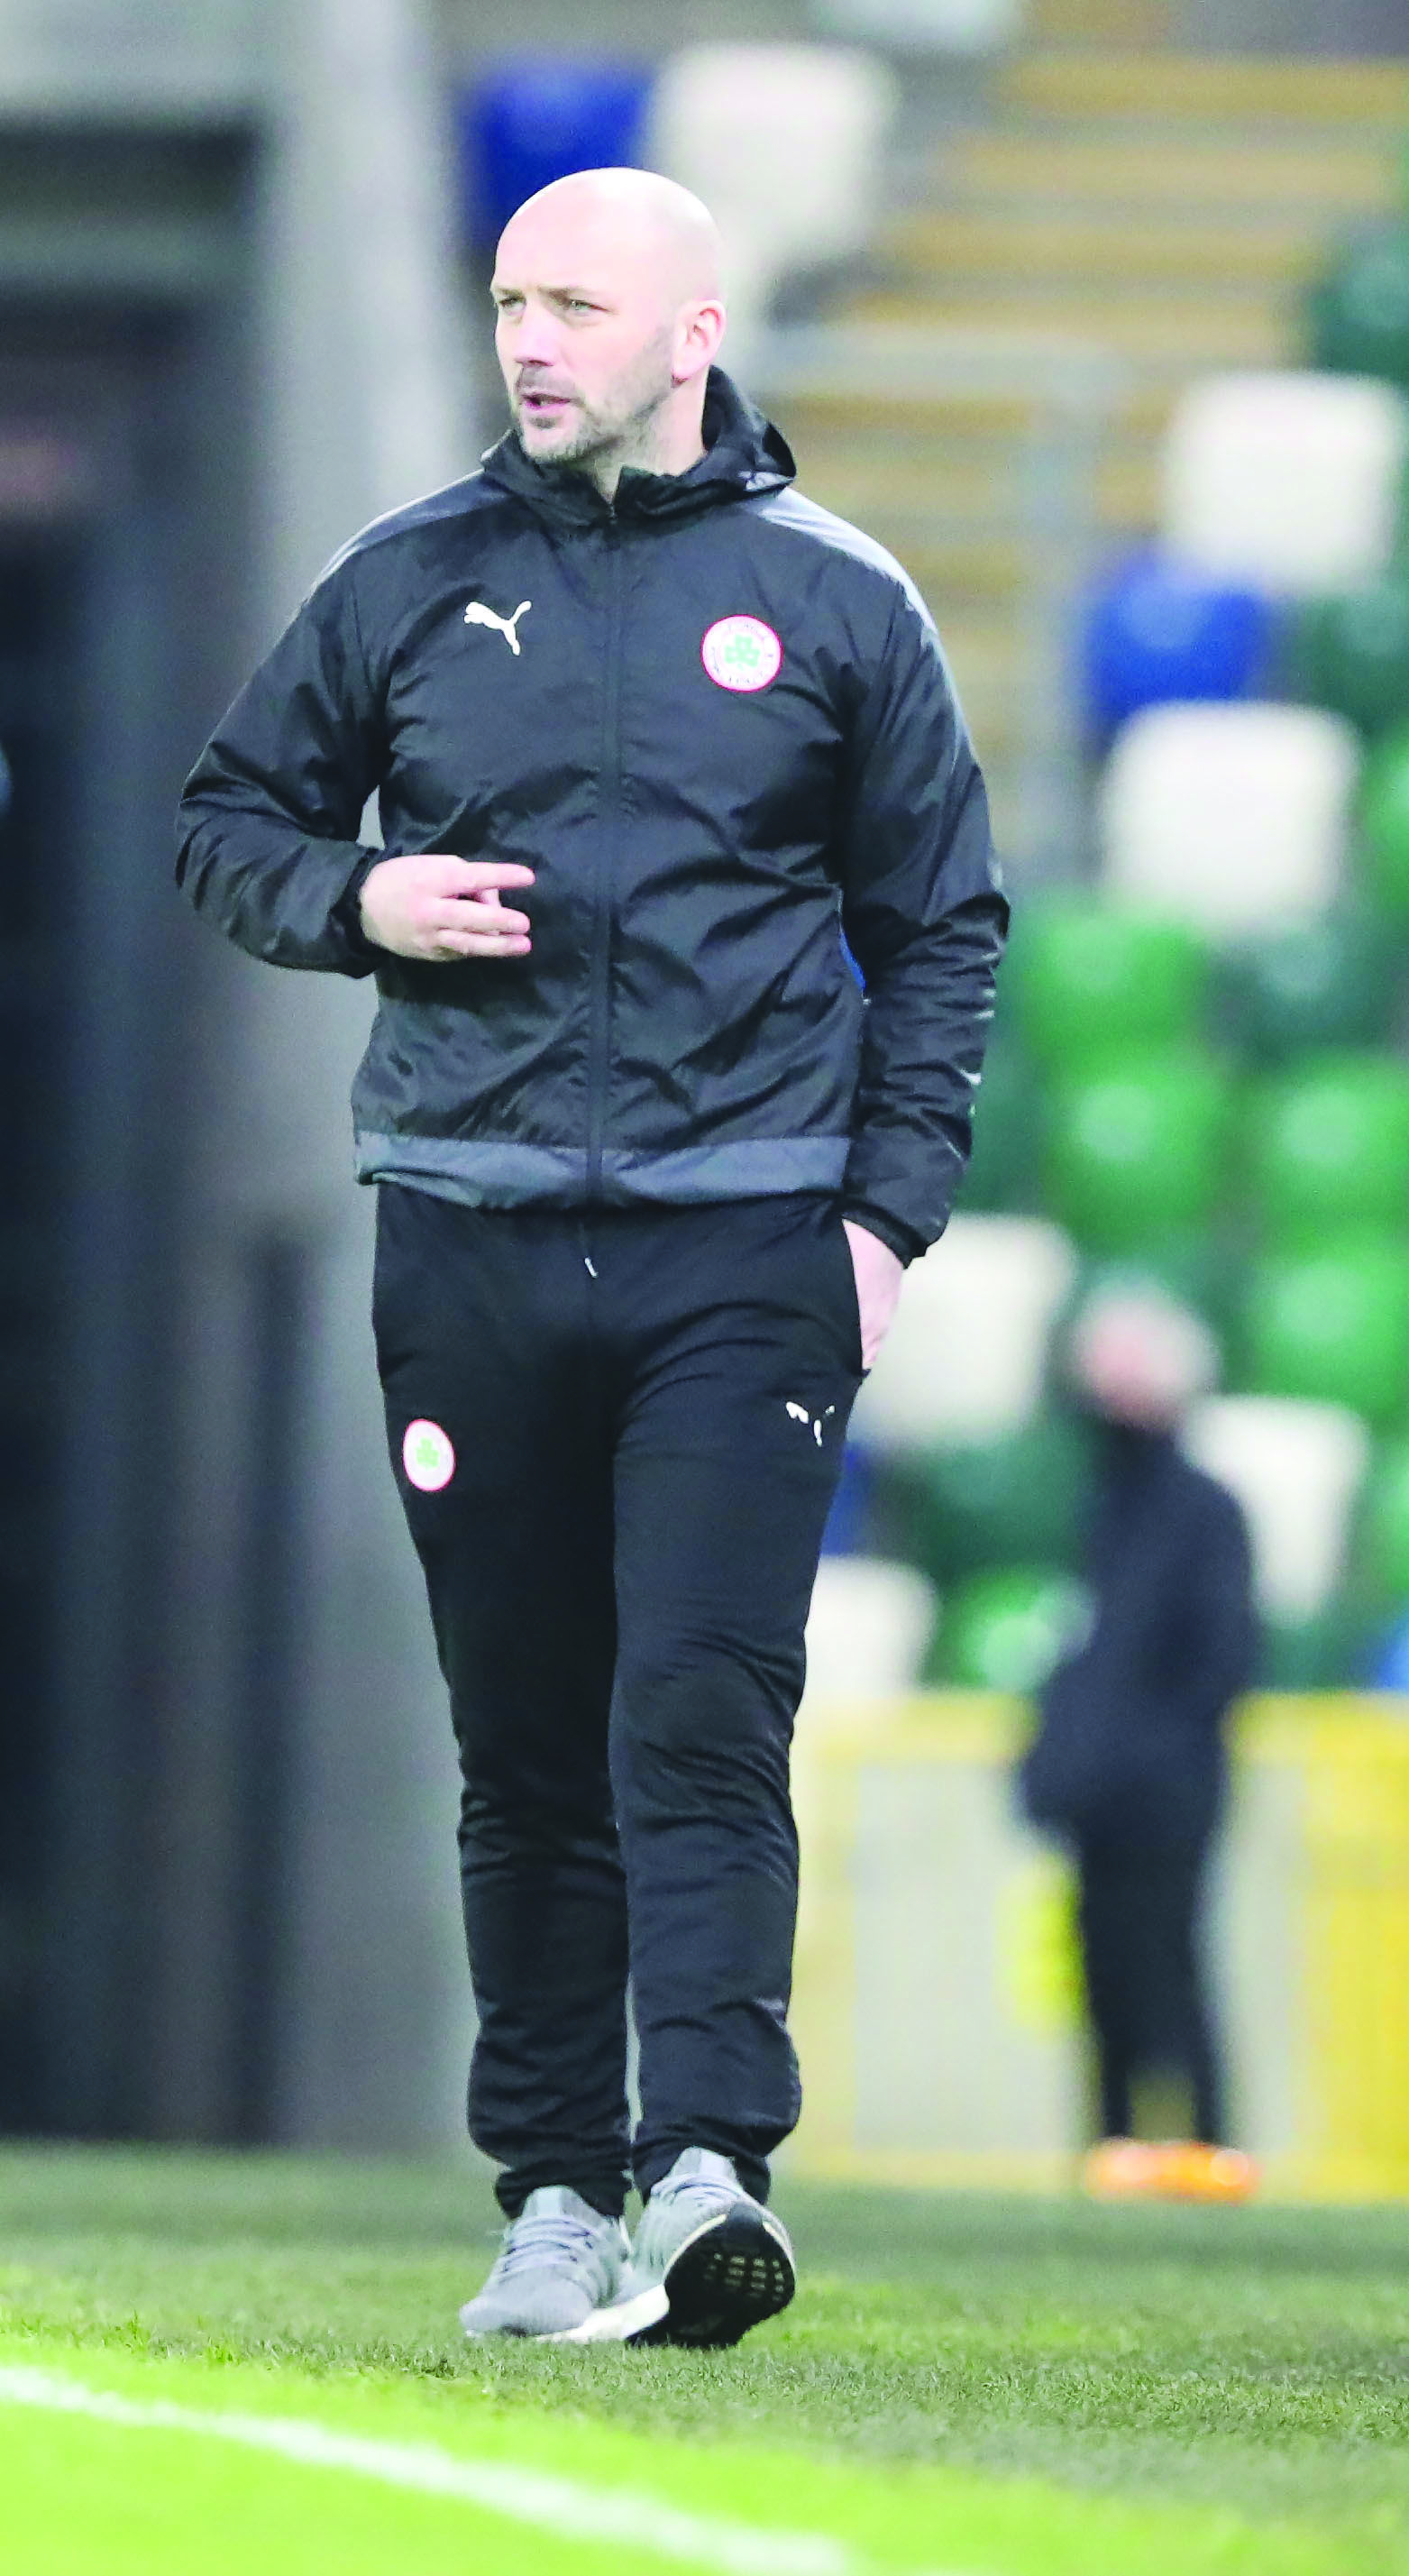 Cliftonville manager Paddy McLaughlin hopes the latest break does not become extended as was the case back in March when the season effectively came to an end